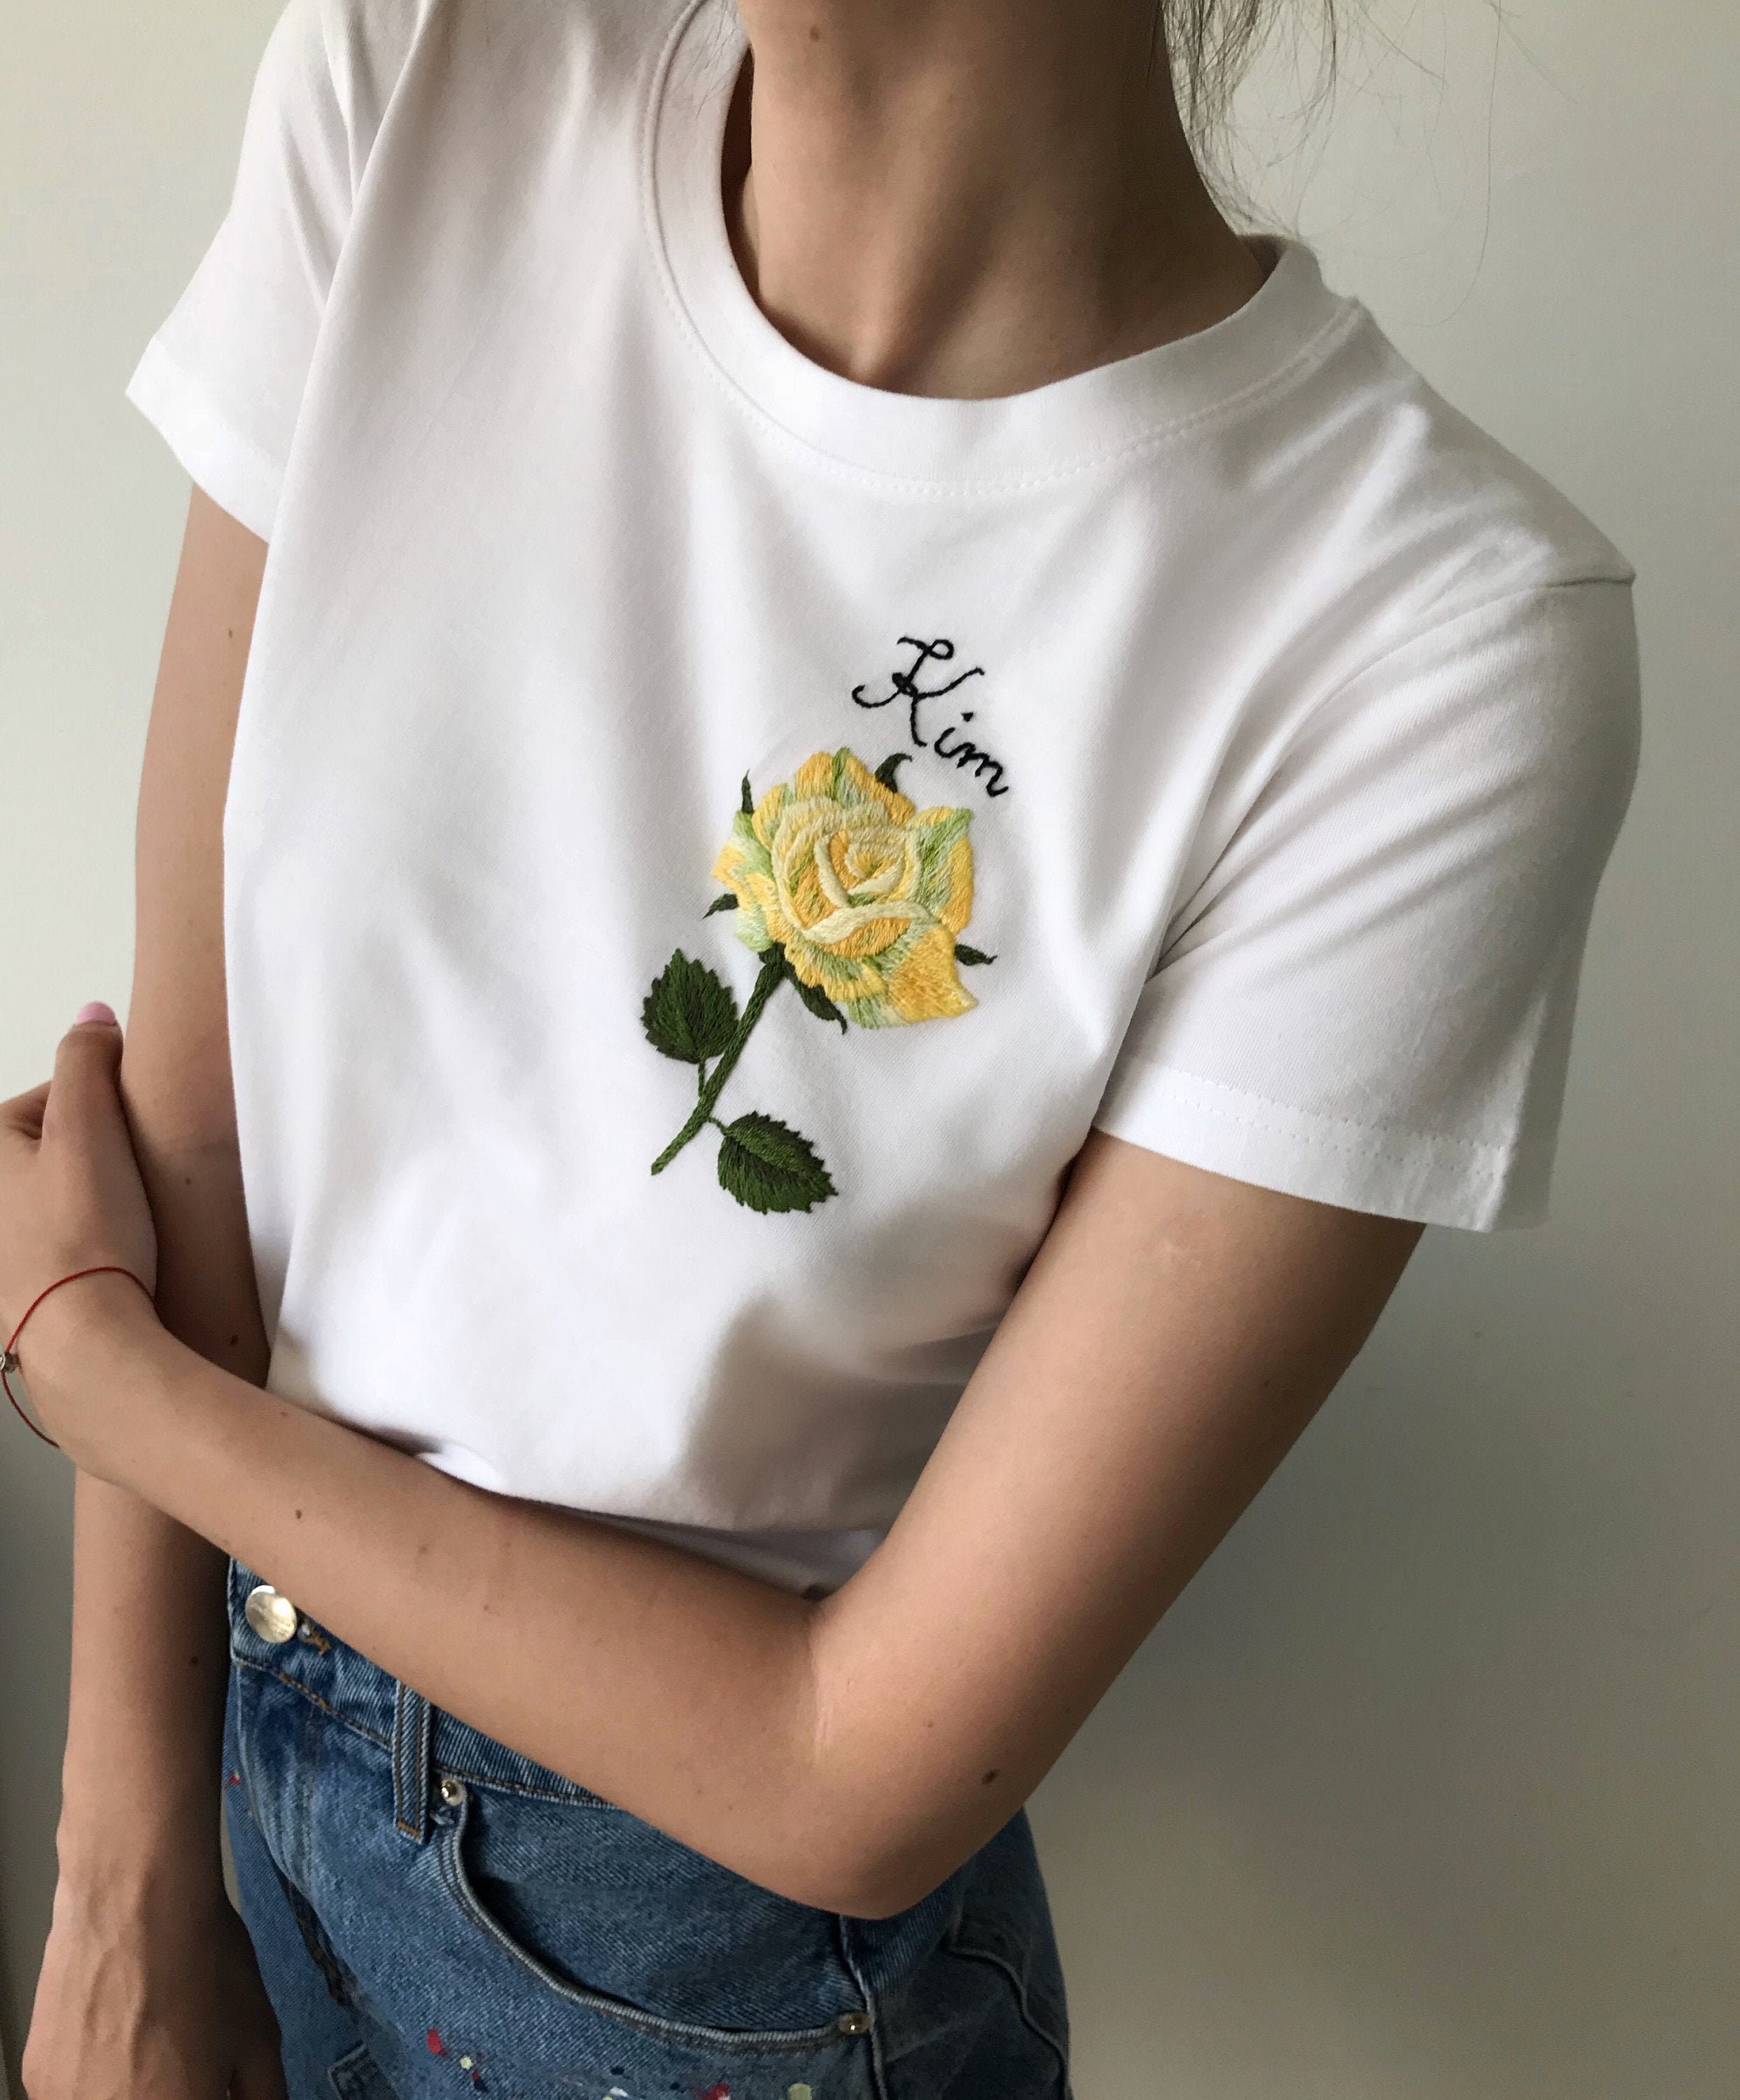 Rose Hand Embroidered T-shirt, Unusual Floral Embroidery Shirt, Custom  Embroidery Tee, Personalized Gift, Self Gifts, Mom Gifts Under 50 -   Canada